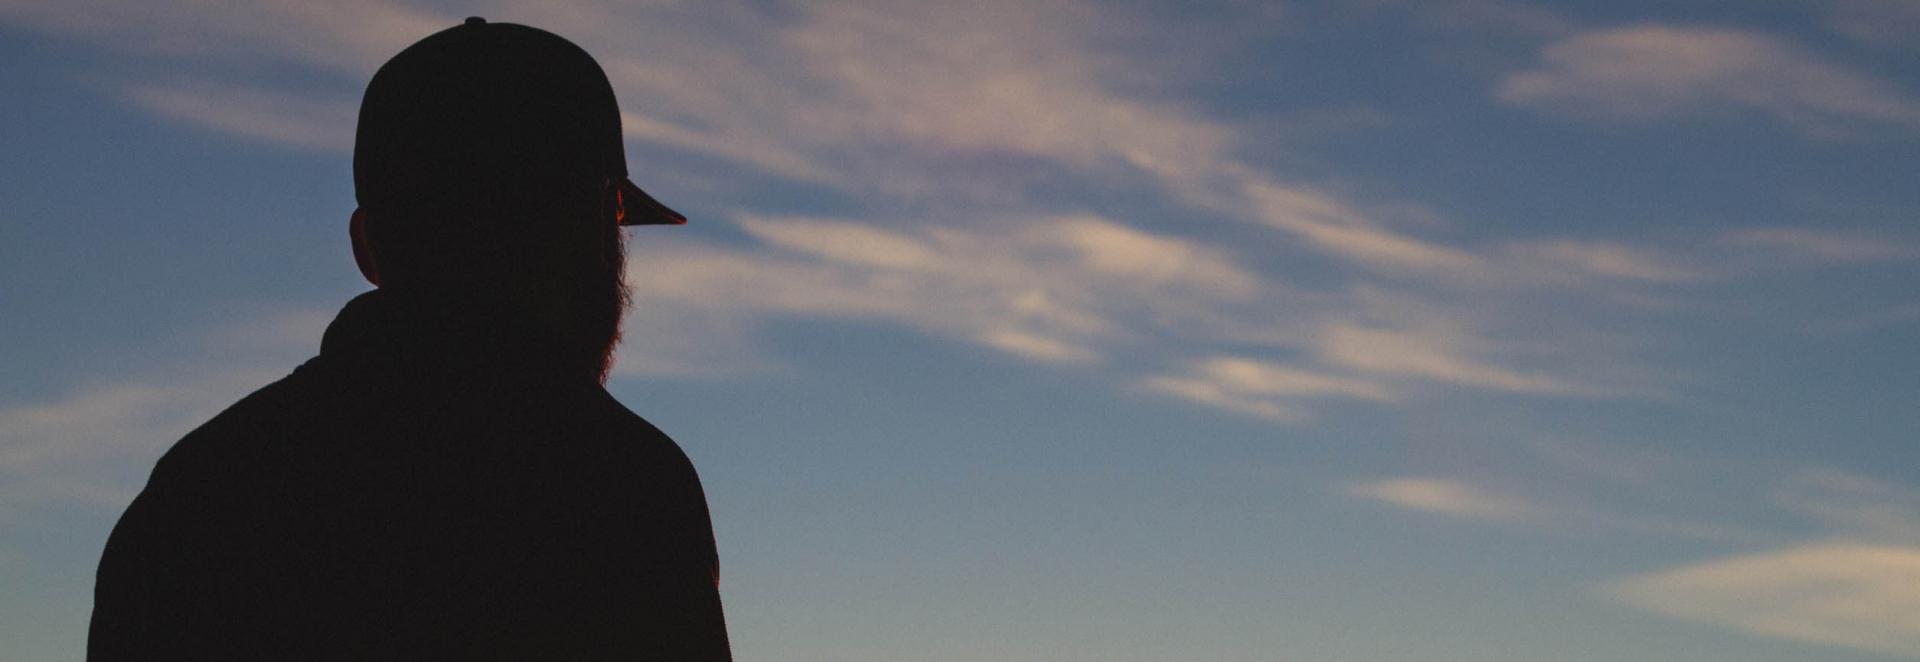 Silhouette of person in baseball cap